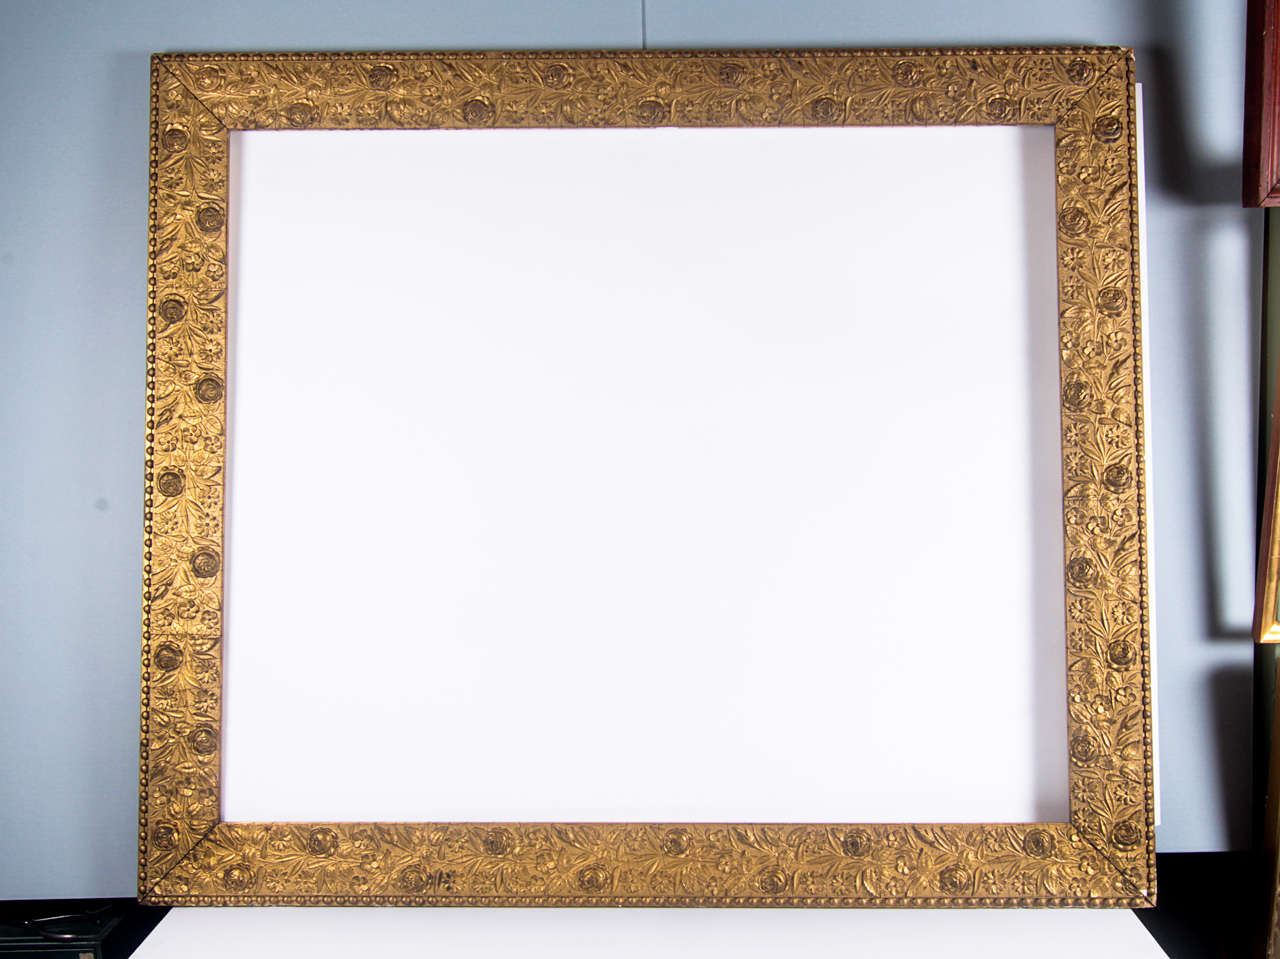 Large gilt frame with rose motif and beaded outer edge

Overall dimensions: 42 1/2 x 36 3/8 inches
Sight size: 35 3/4 x 29 1/2 inches
Moulding width: 3 1/2 inches